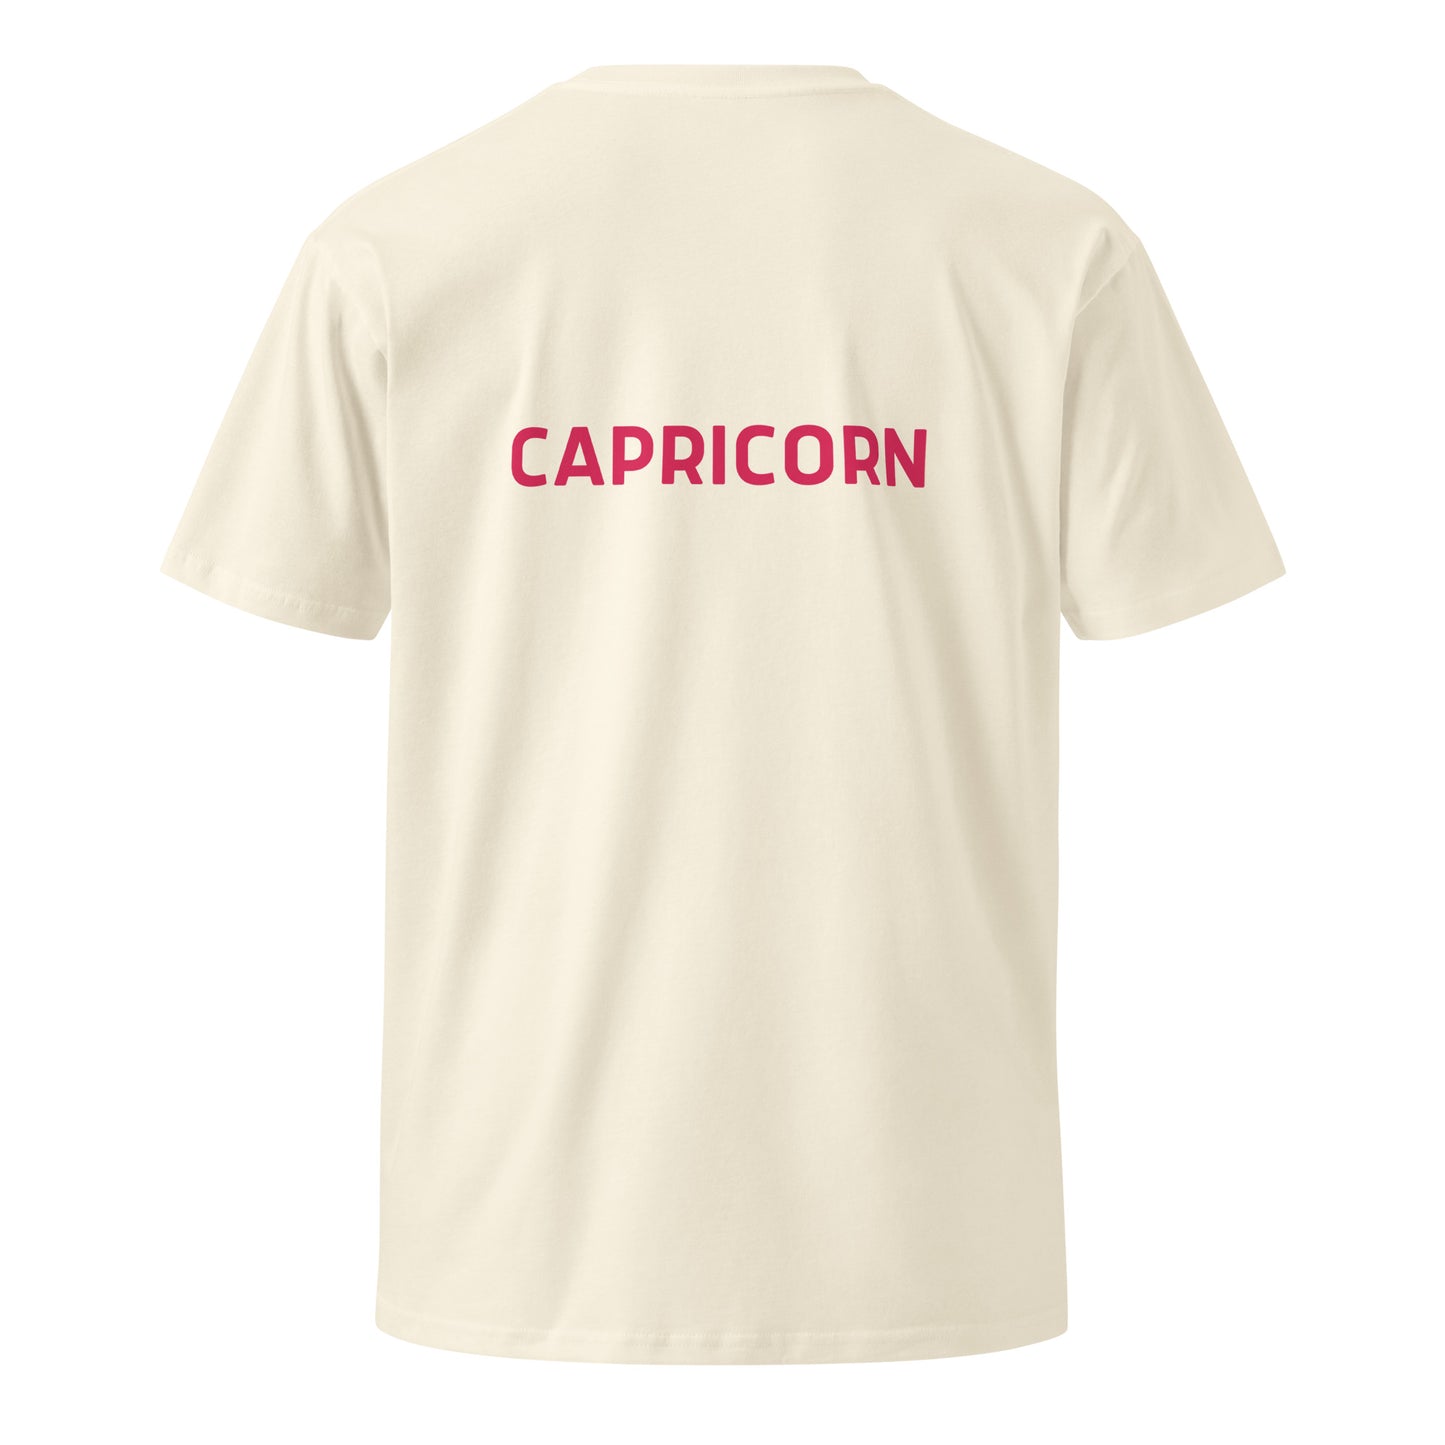 Be the Star You are! Capricorn Unisex premium t-shirt